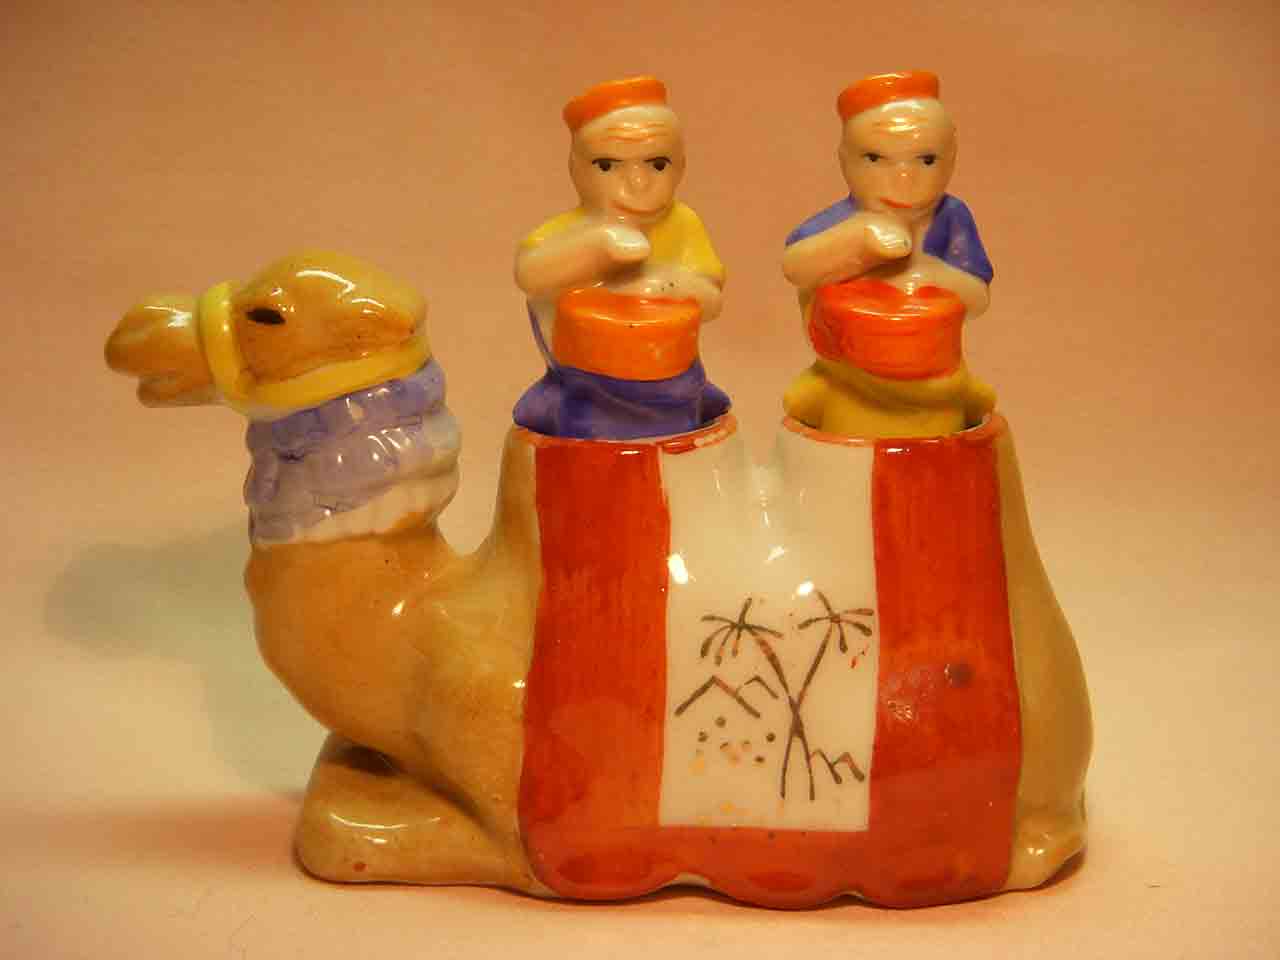 Camel nodder with monkeys as salt and pepper shakers